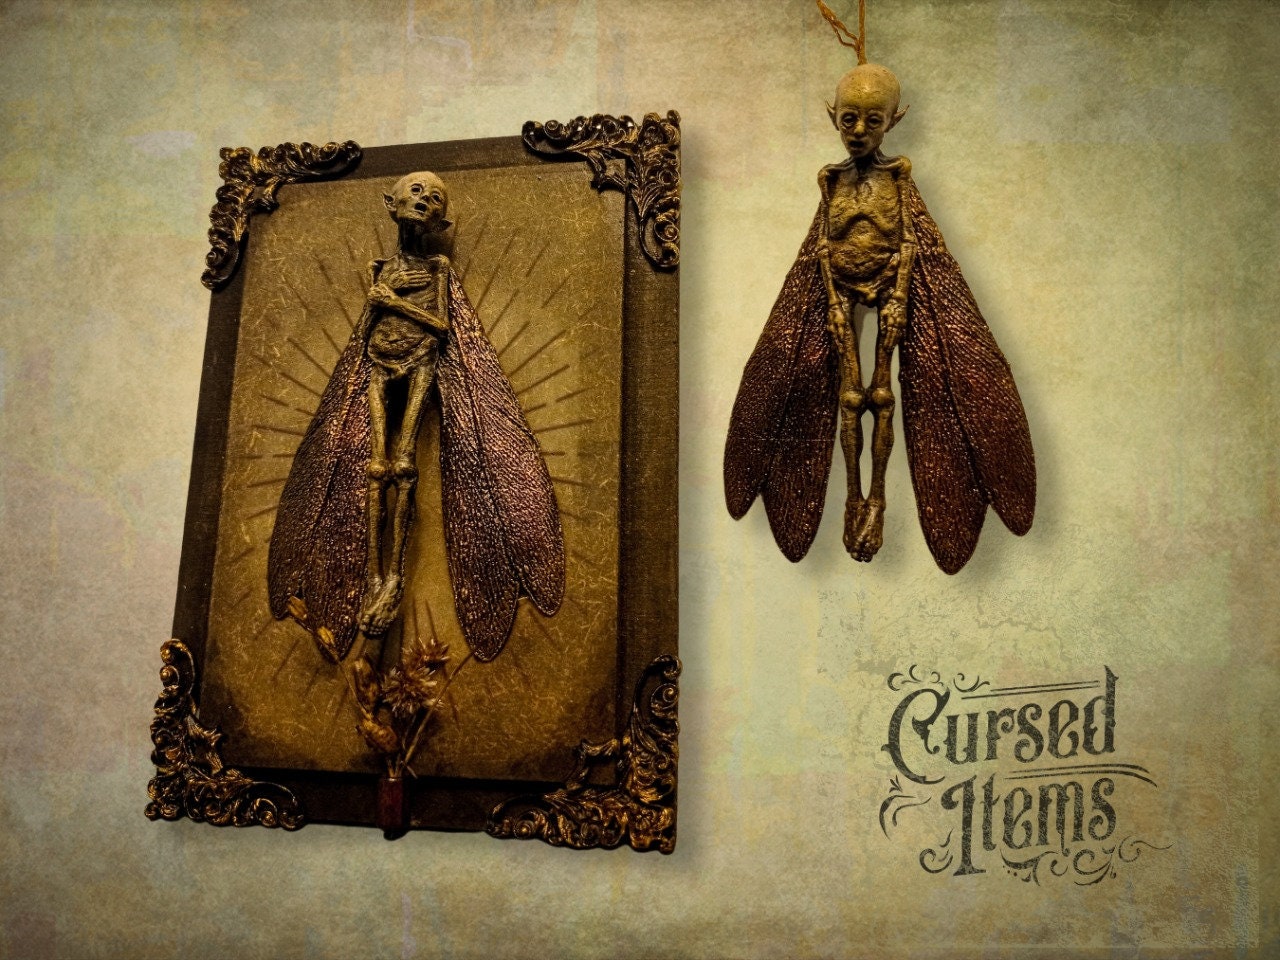 Cursed Items Dead Faeries Pair Framed and Hanging Display photo image